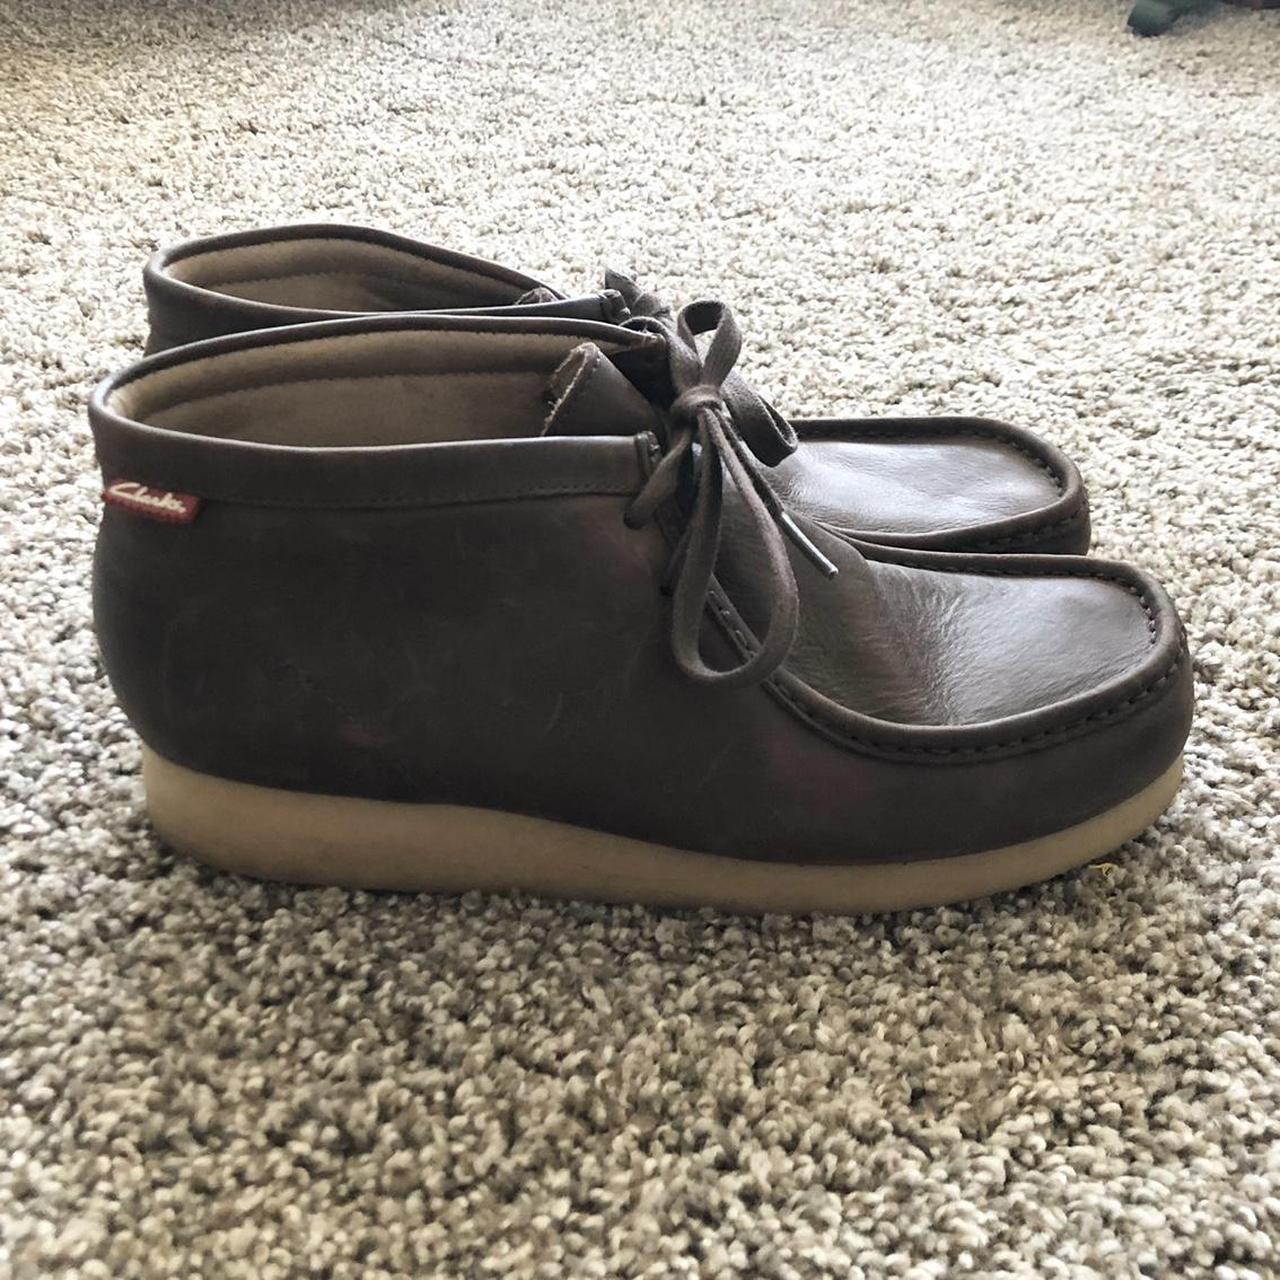 Product Image 1 - Clarks wallabees size 9.5